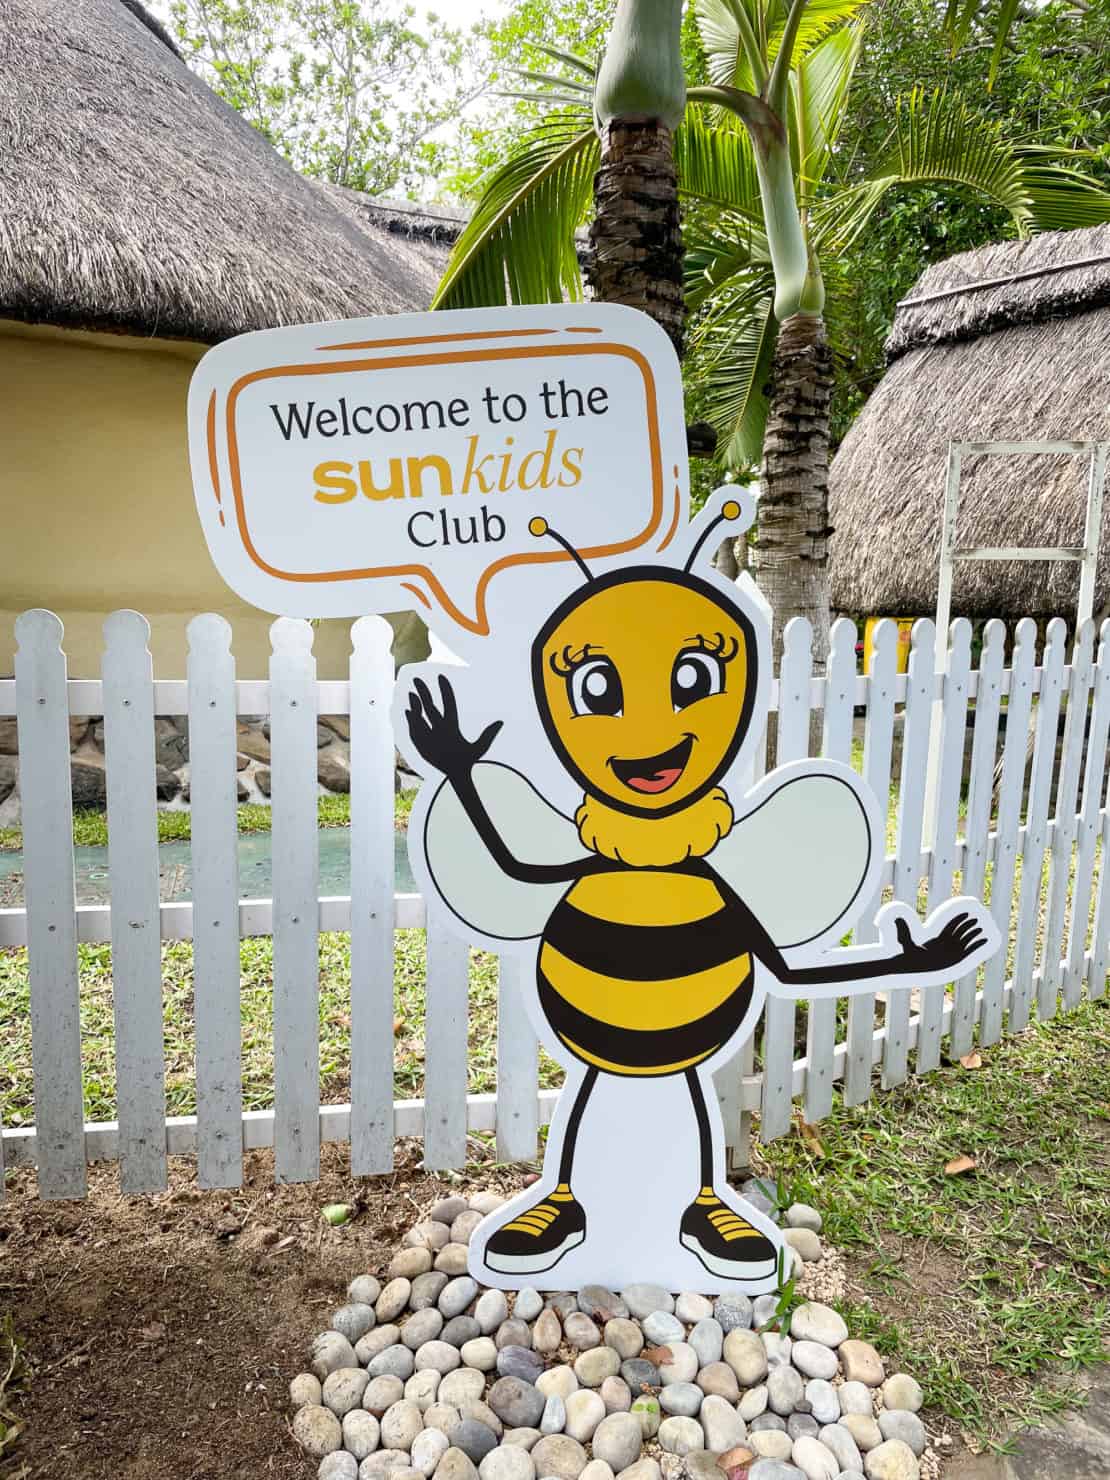 Sunlife kids club bee represents their approach to biodiversity and maintaining the culture and traditions of Mauritius